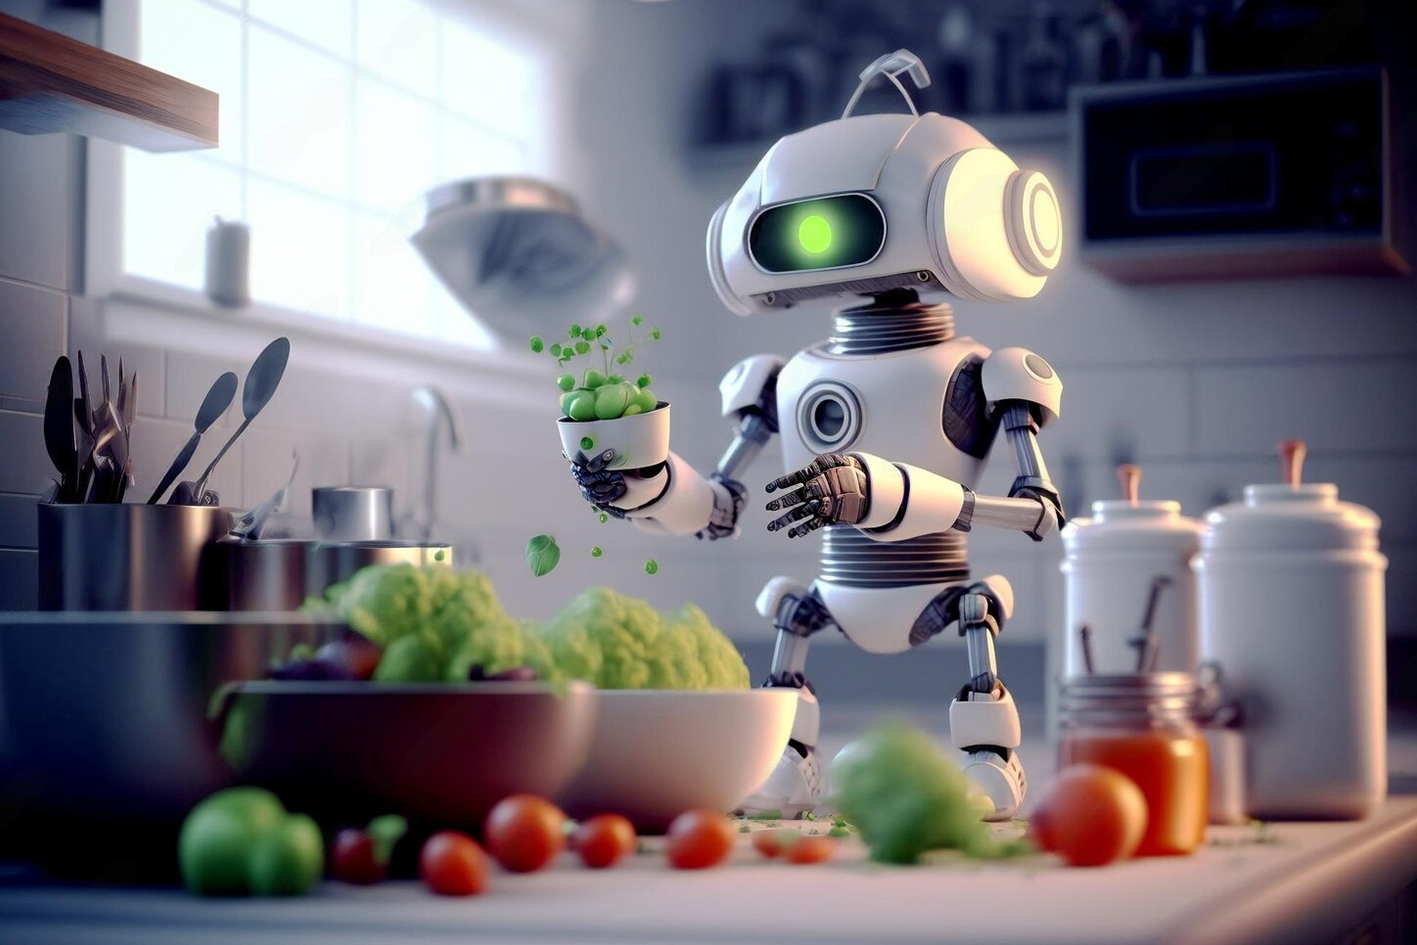 TASTE THE FUTURE: AI COOKING ROBOTS LEADING THE WAY - Tech Blogs